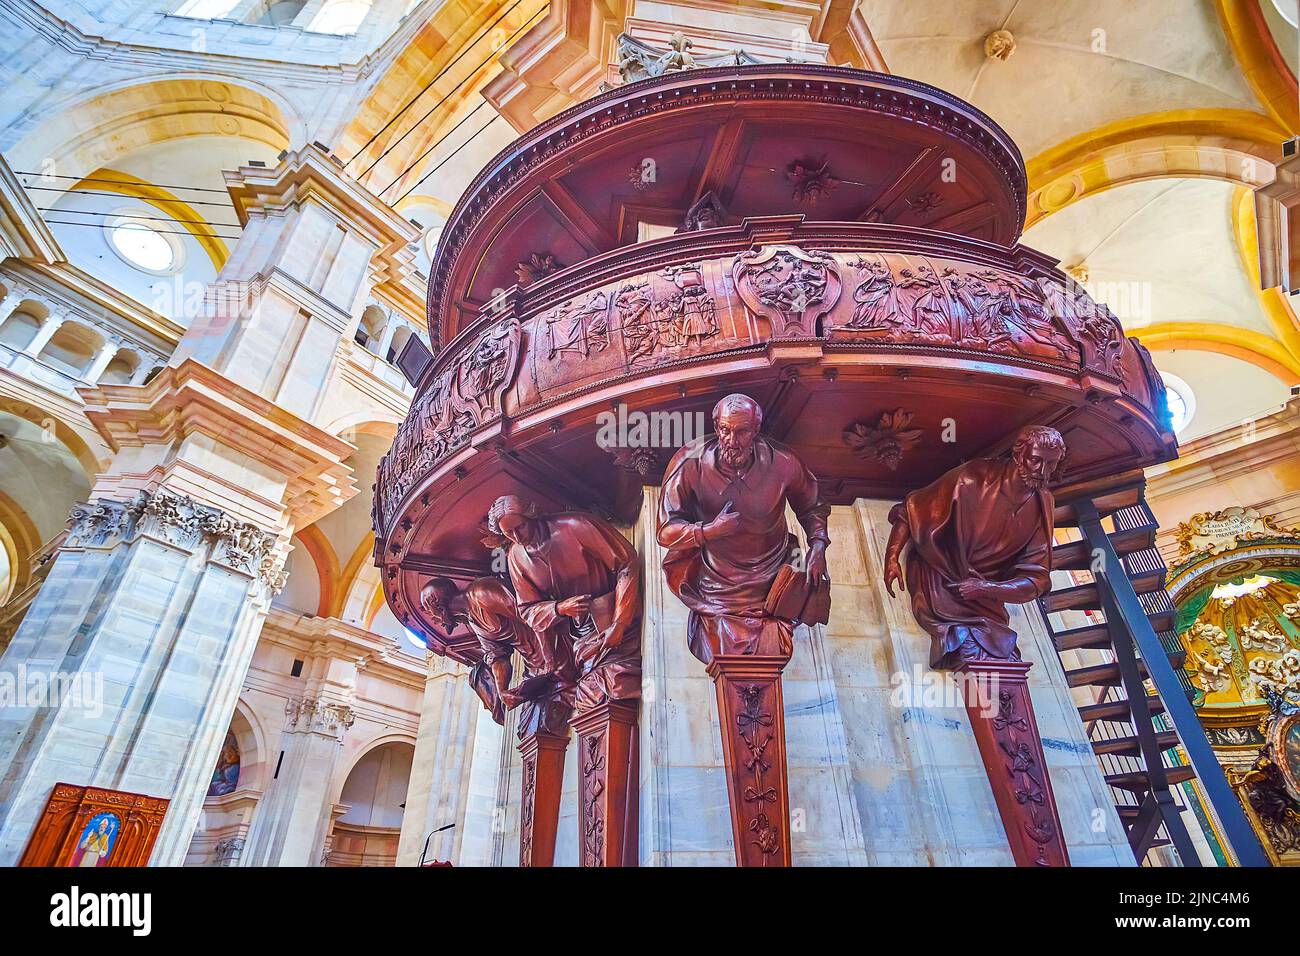 PAVIA, ITALY - APRIL 9, 2022: The wooden carved pulpit in Cathedral od Pavia made by sculptor Siro Zanella, on April 9 in Pavia, Italy Stock Photo